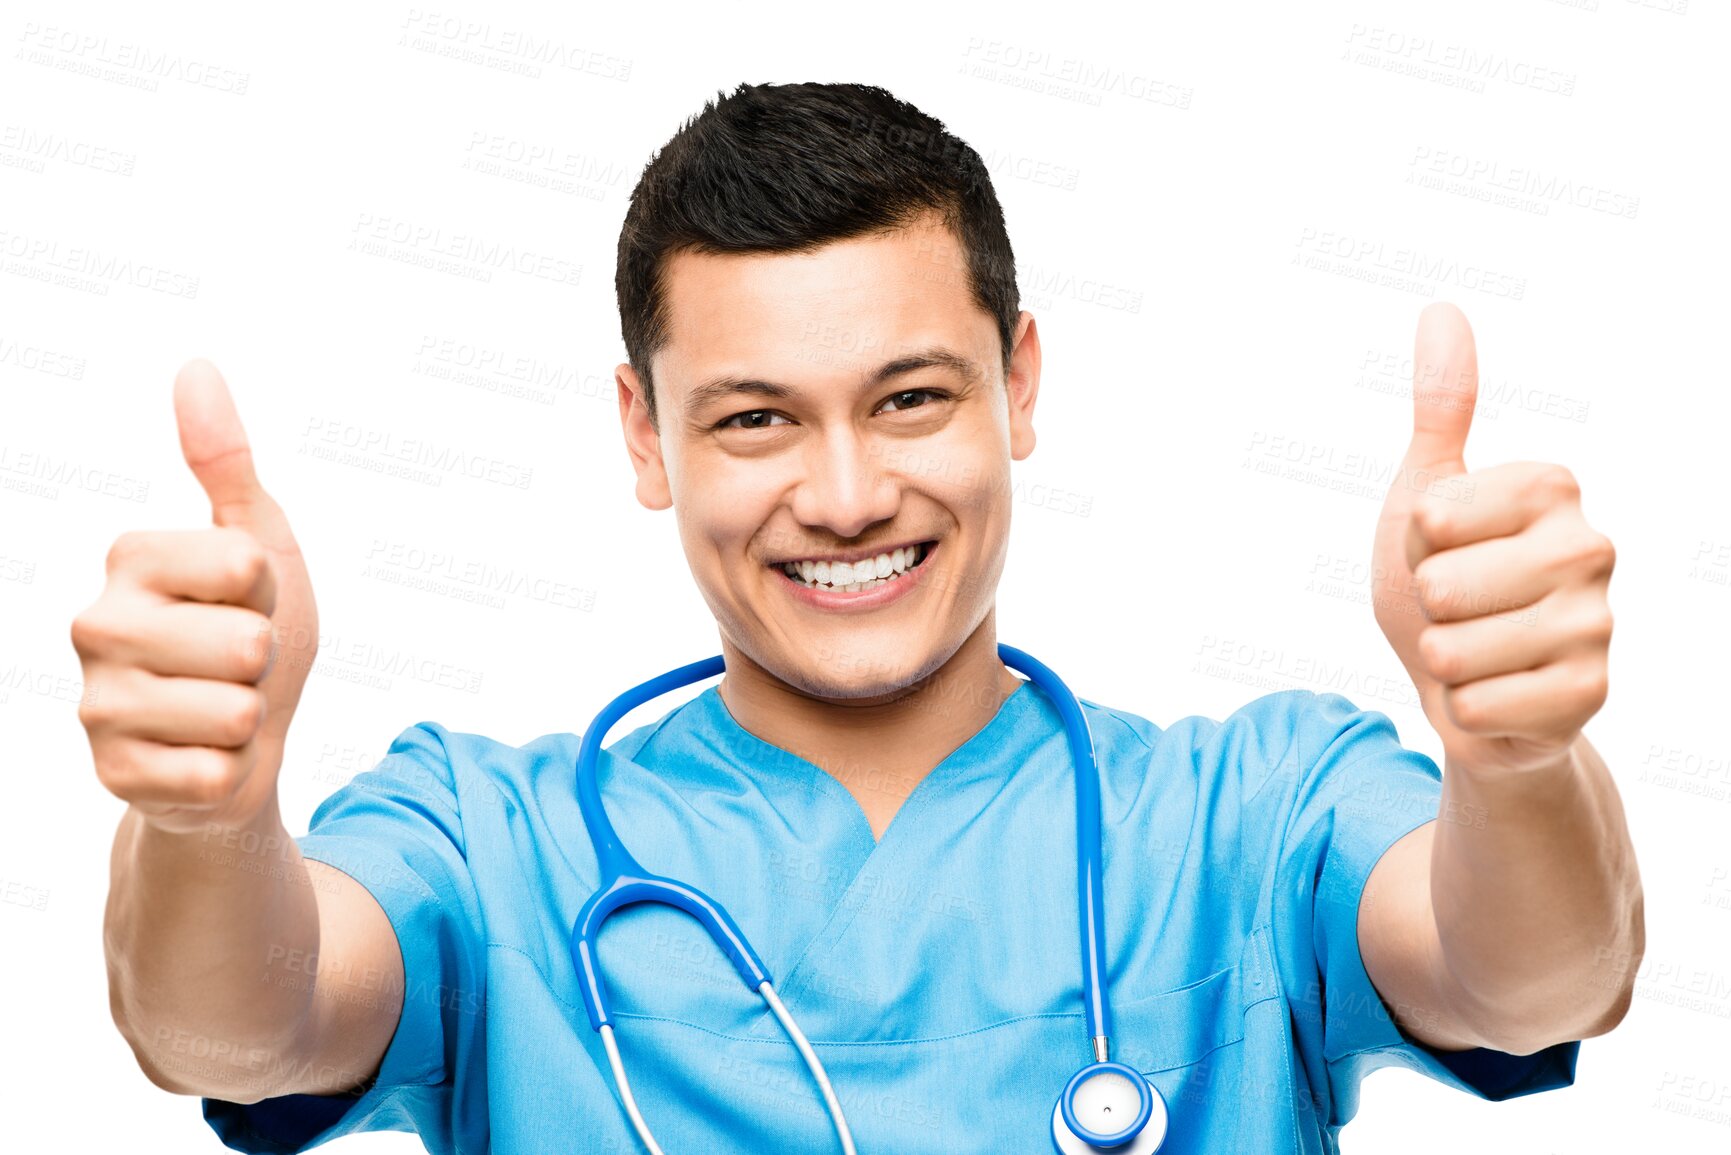 Buy stock photo Thumbs up, surgeon or portrait of a happy man with a smile for success, agreement or like sign. Good service, approve or excited doctor with okay hand gesture isolated on transparent png background